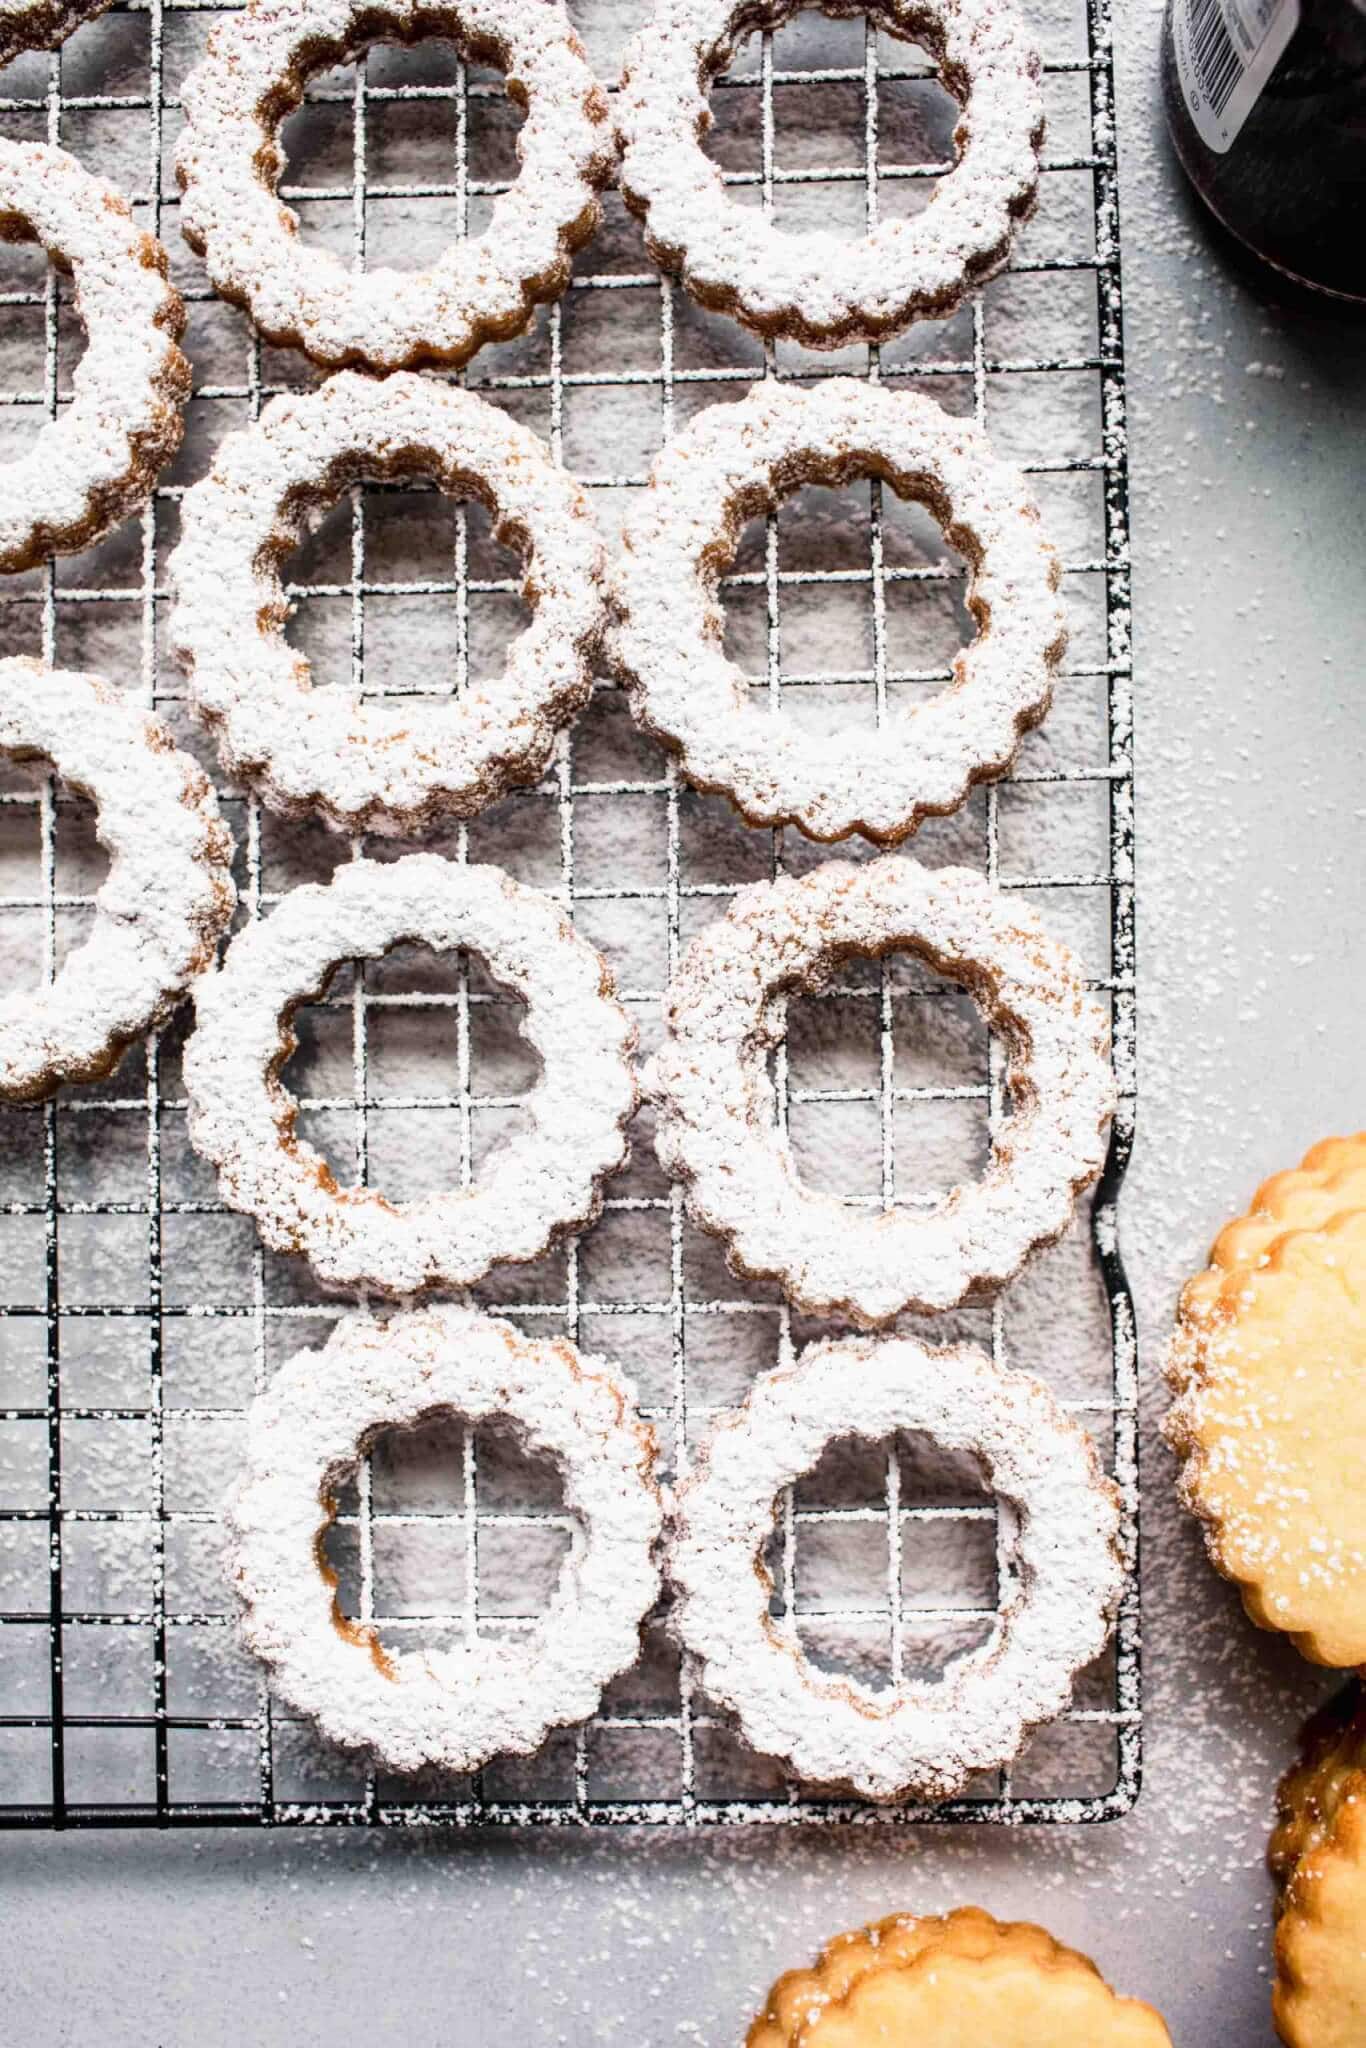 Cut out and baked cookies dusted with powdered sugar.